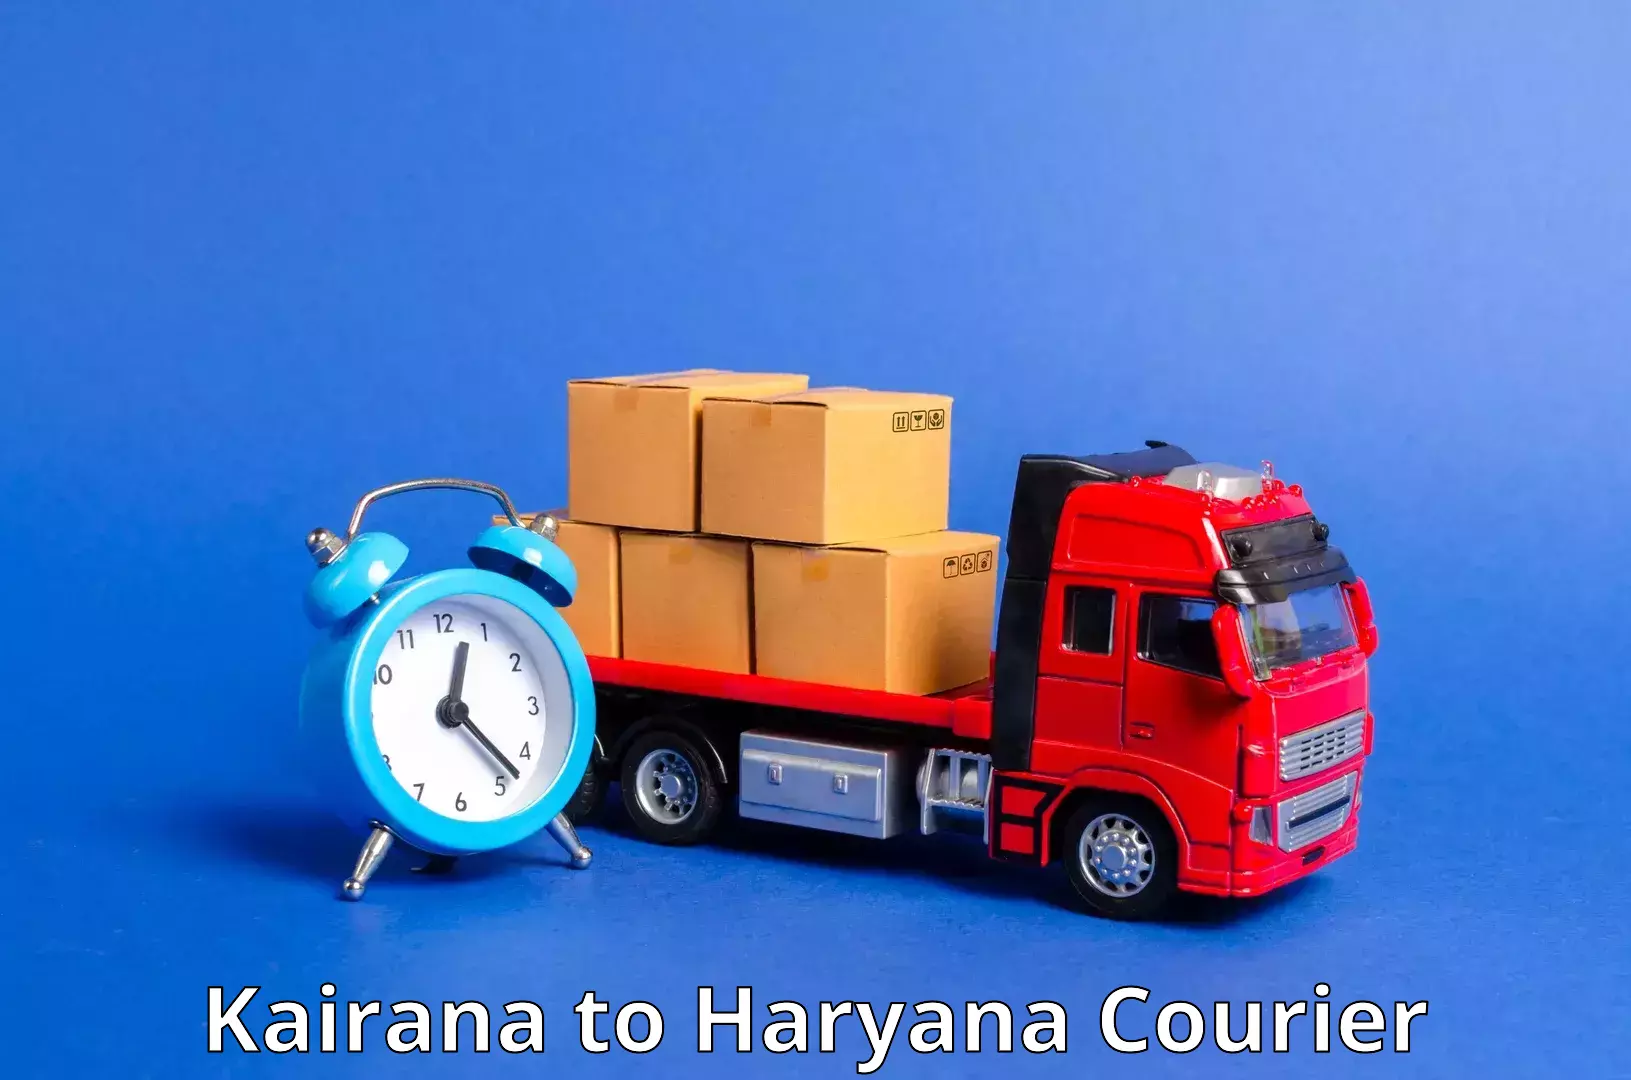 Parcel service for businesses Kairana to Chirya